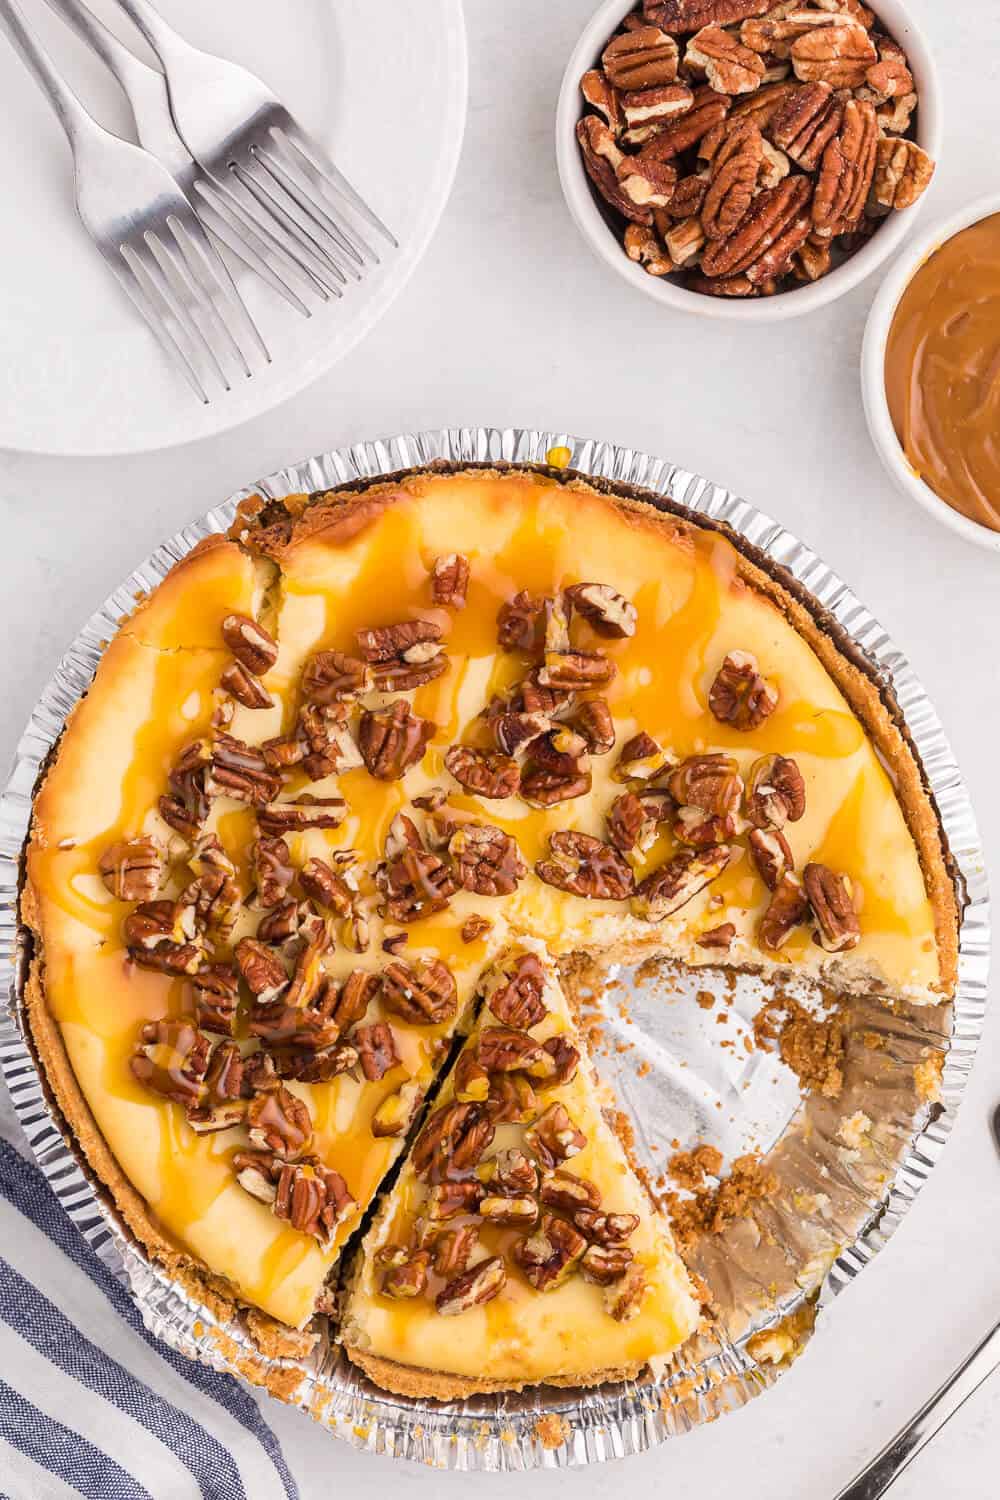 A whole caramel pecan cheesecake with a slice cut